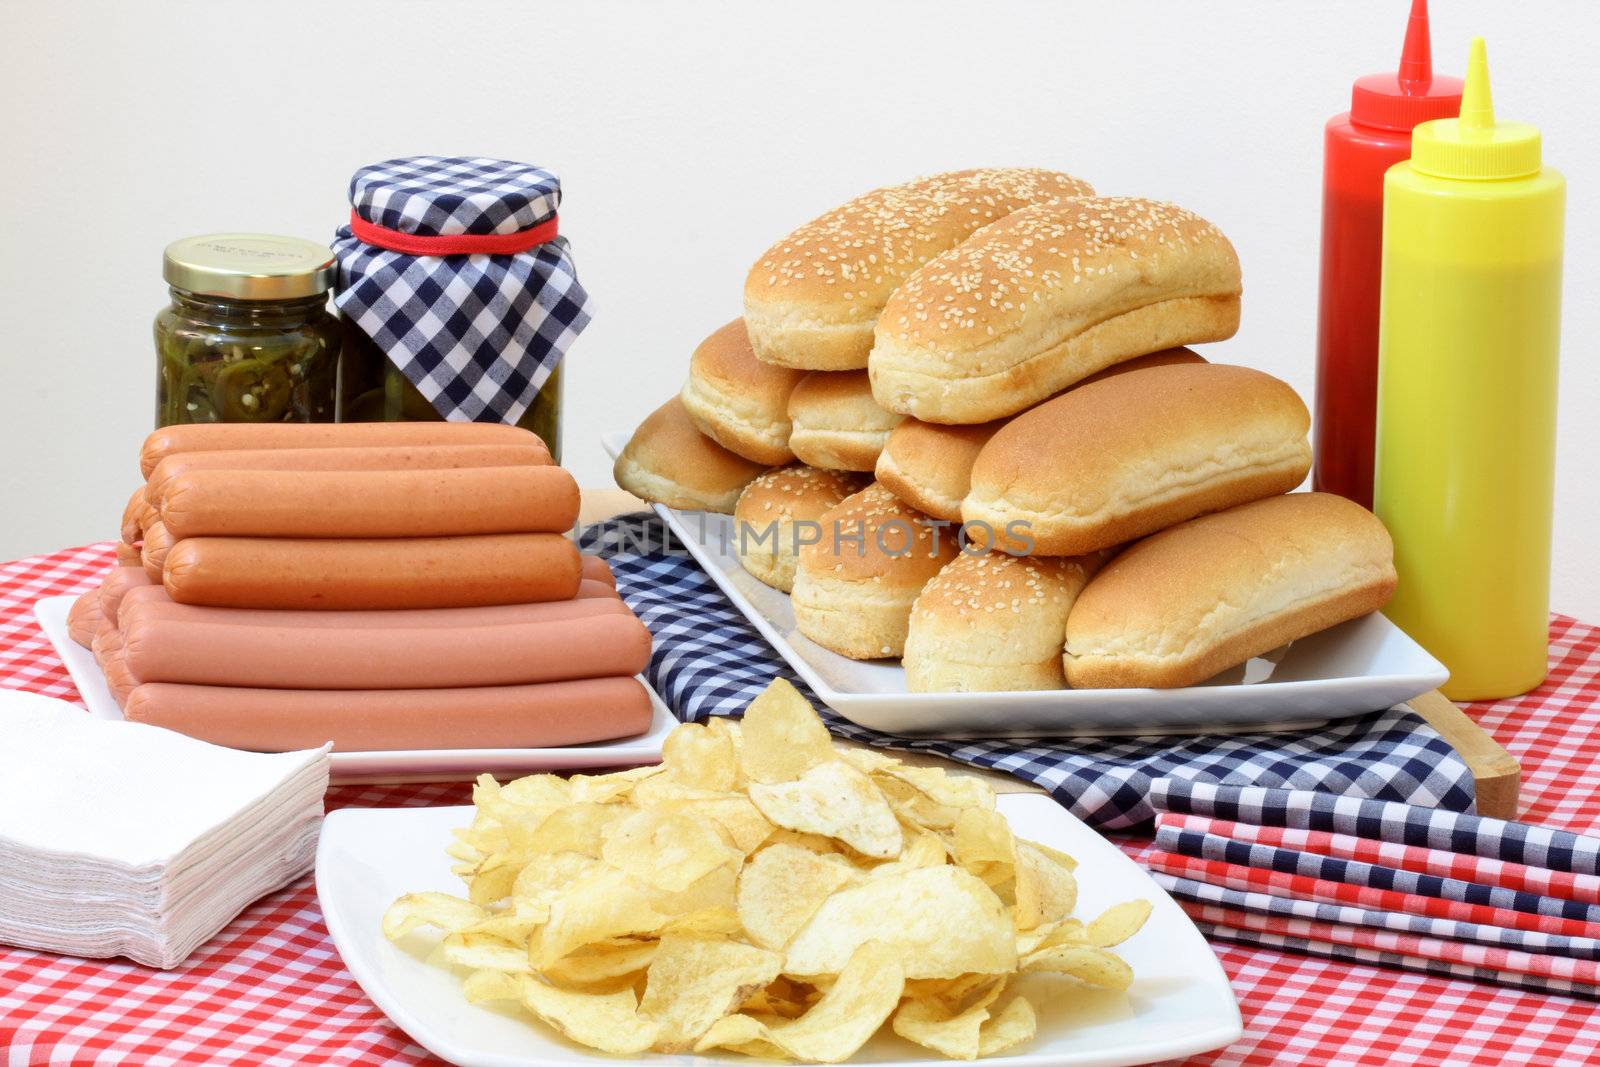 hot dog ingredients on a nice table setting rich in colors and flavors 